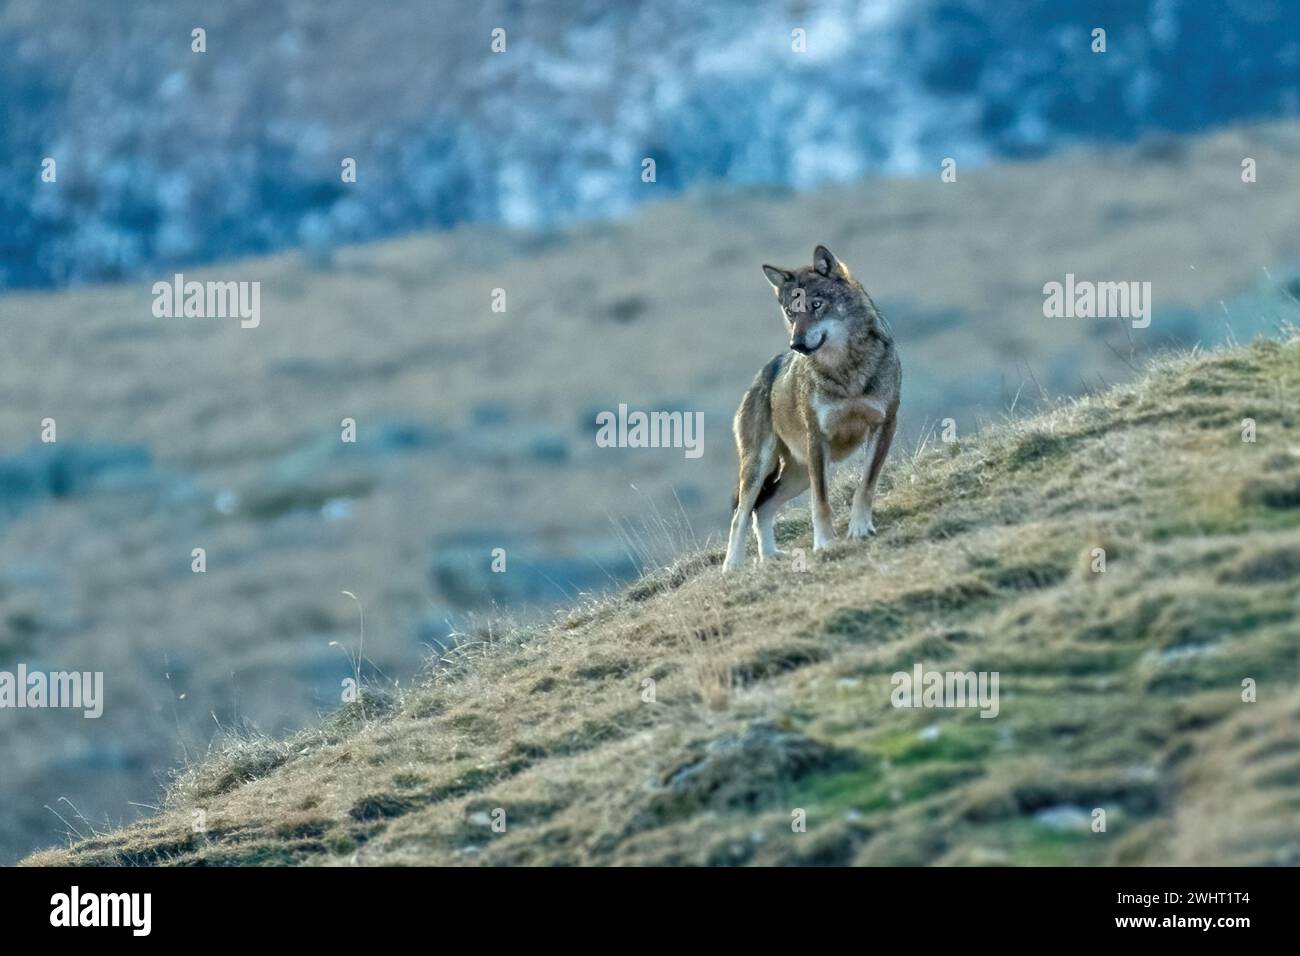 Rare example of a wild Italian wolf taken in nature while looking downstream in search of prey at dawn. Alps, Italy, January. Stock Photo